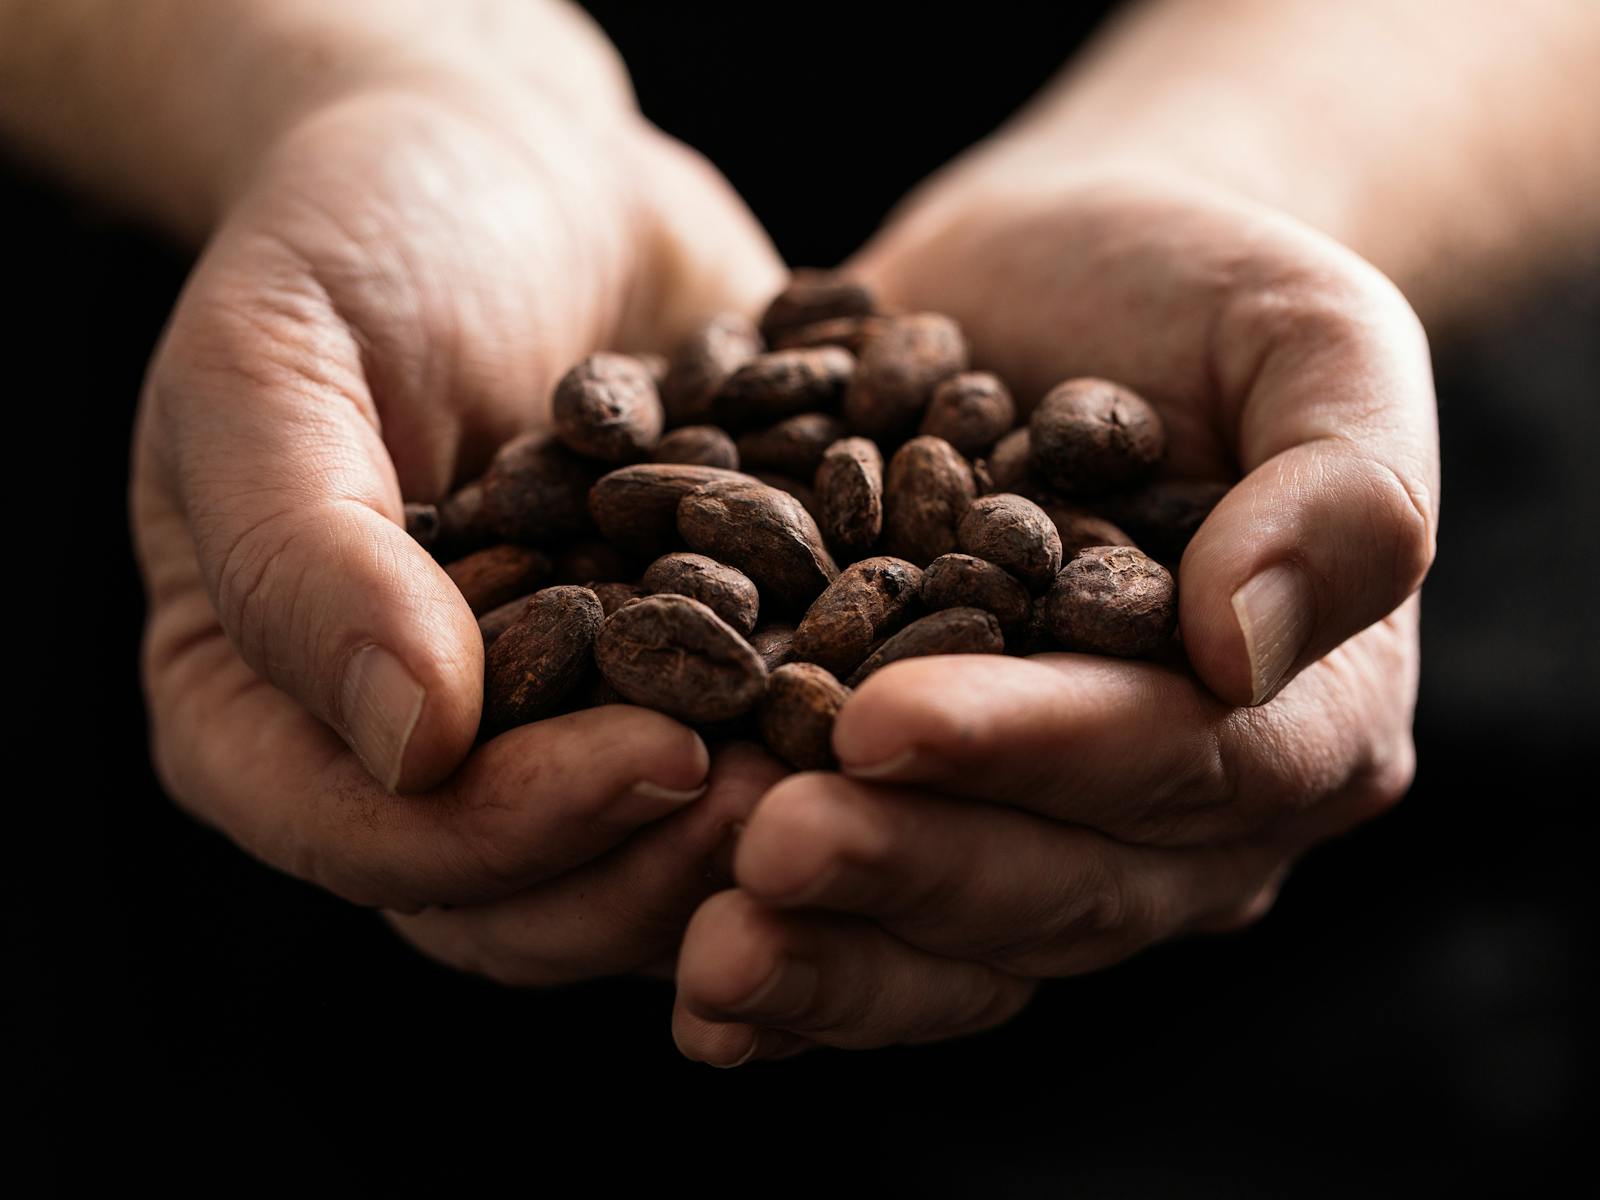 Federation Artisan Chocolate Cacao Beans are sourced directly to make bean to bar chocolate